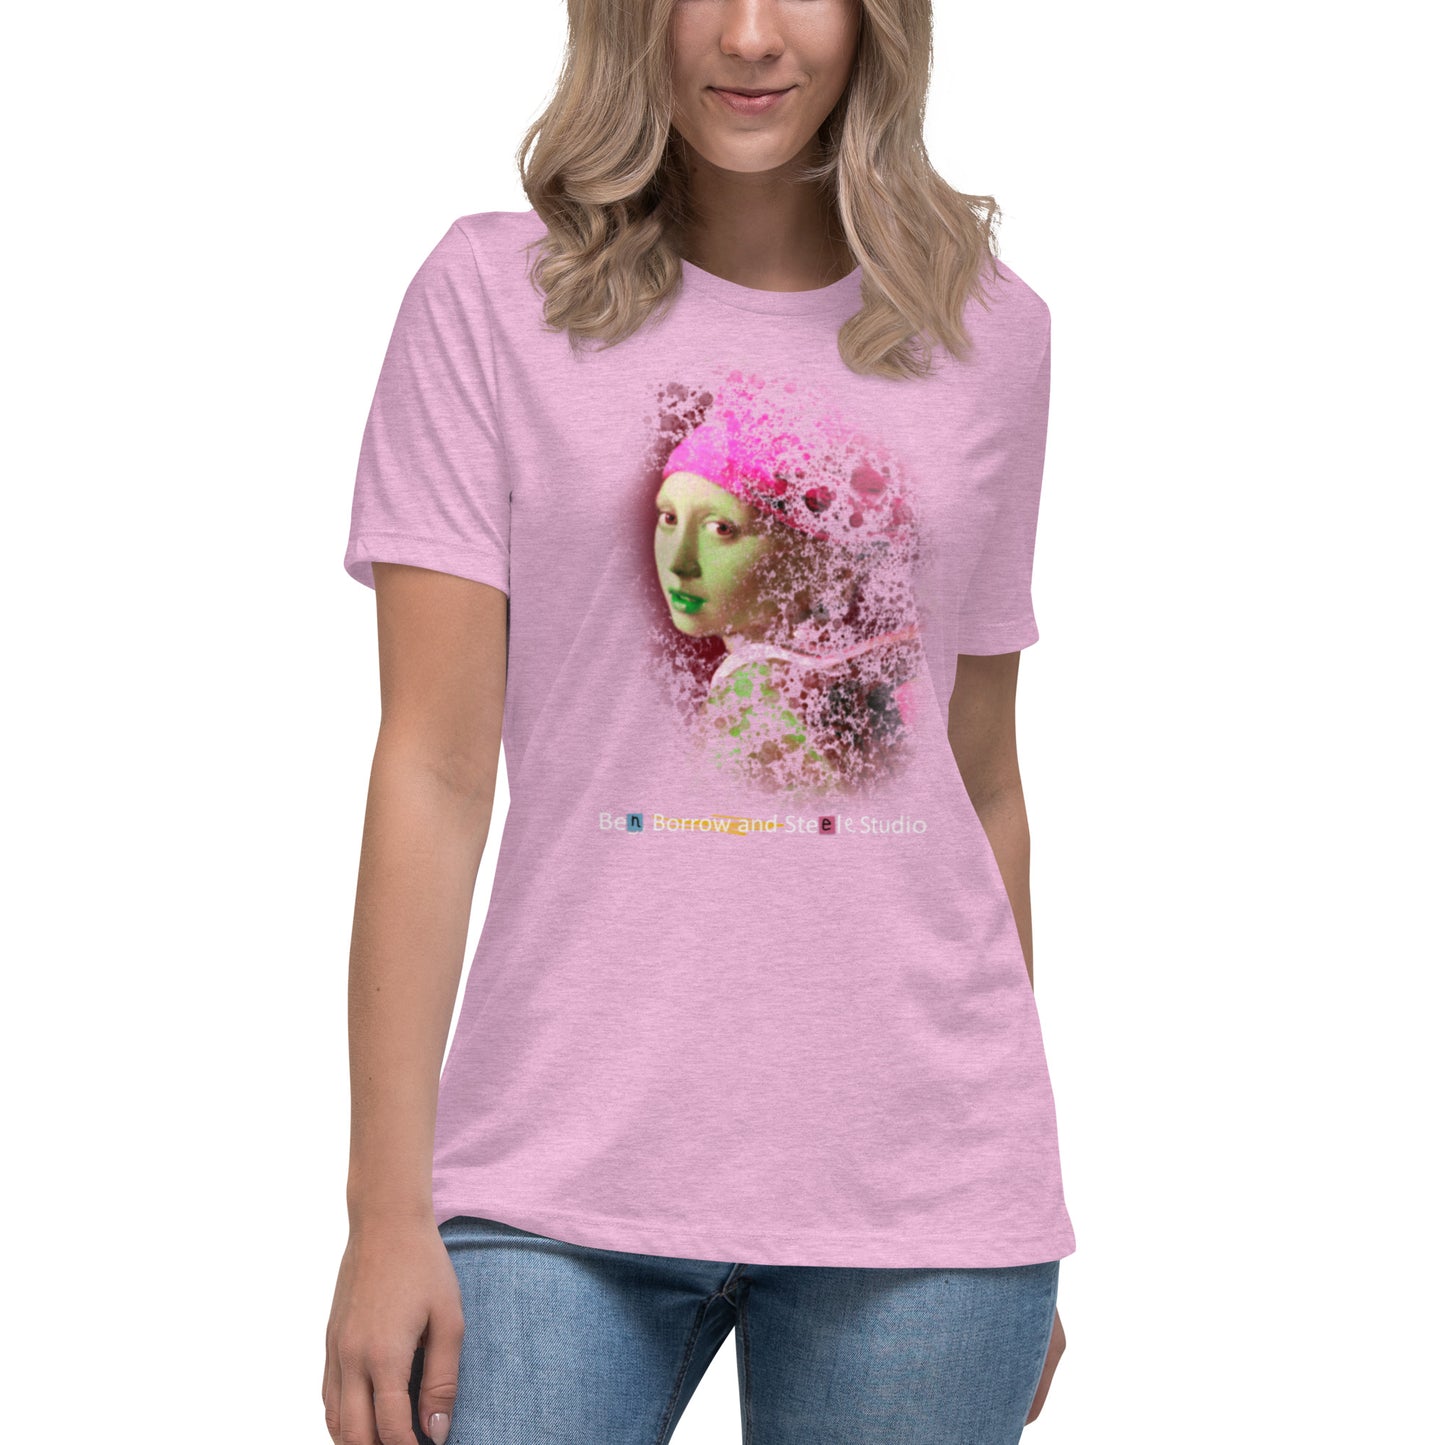 Lost Girl Women's Relaxed T-Shirt